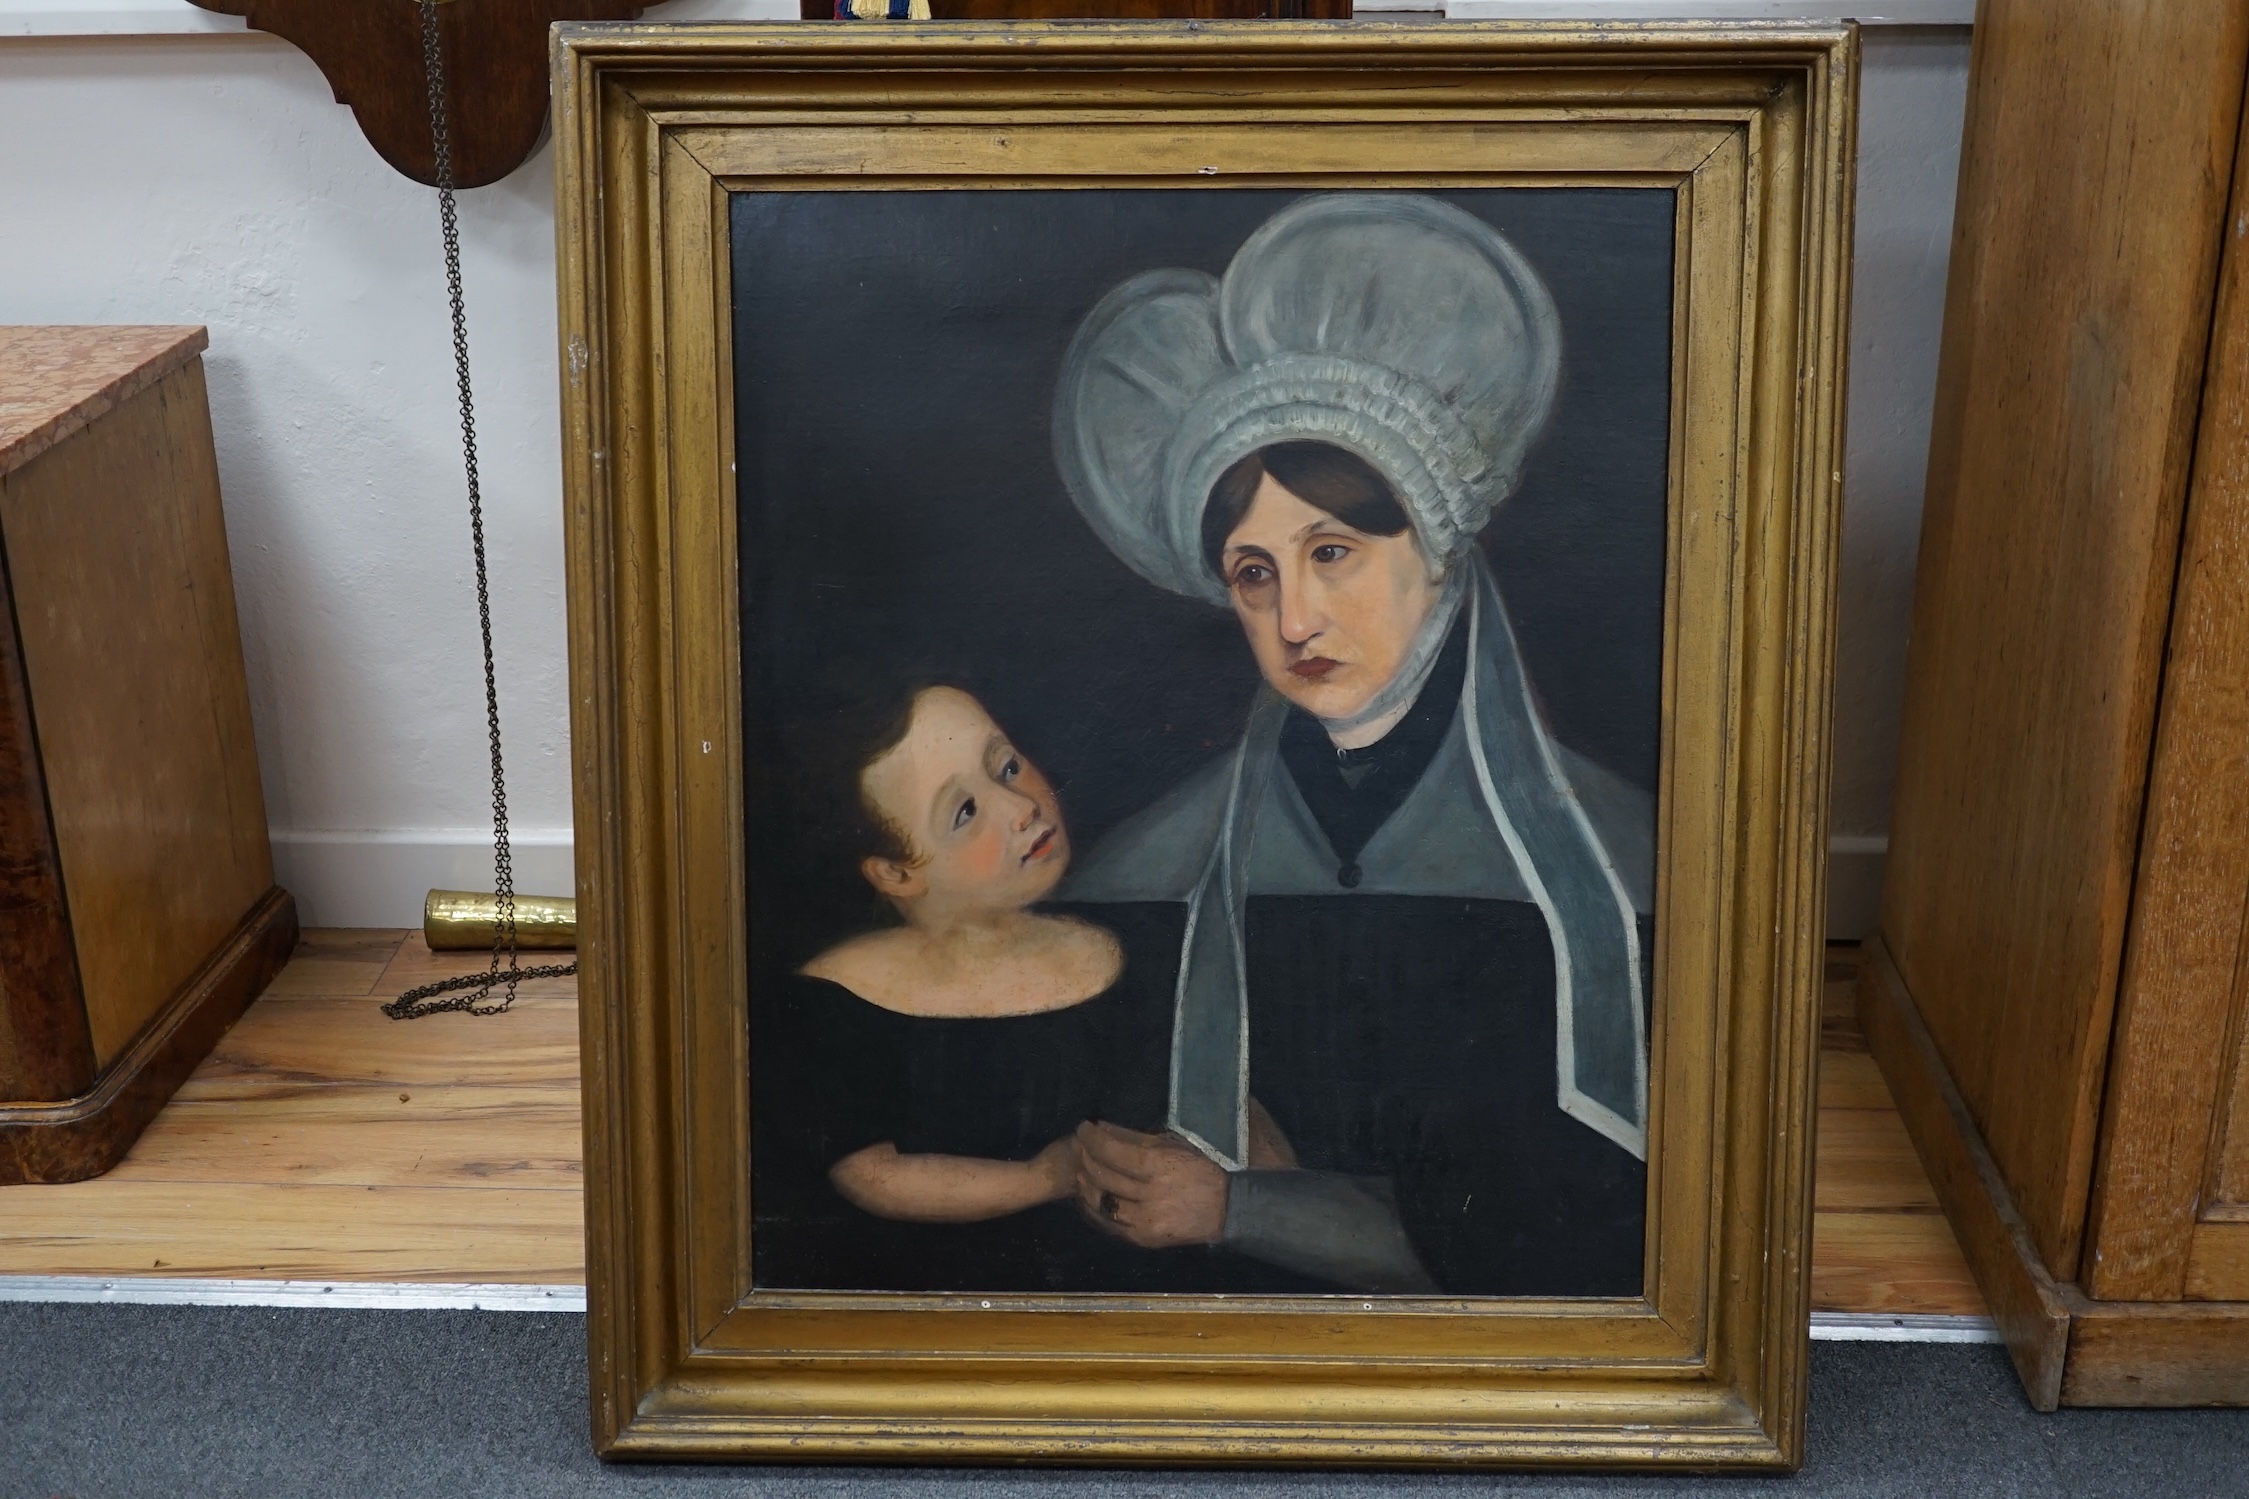 Early to mid 19th century, naive school, oil on canvas, Portrait of a mother and child in mourning, 73 x 60cm, gilt frame. Condition - poor to fair